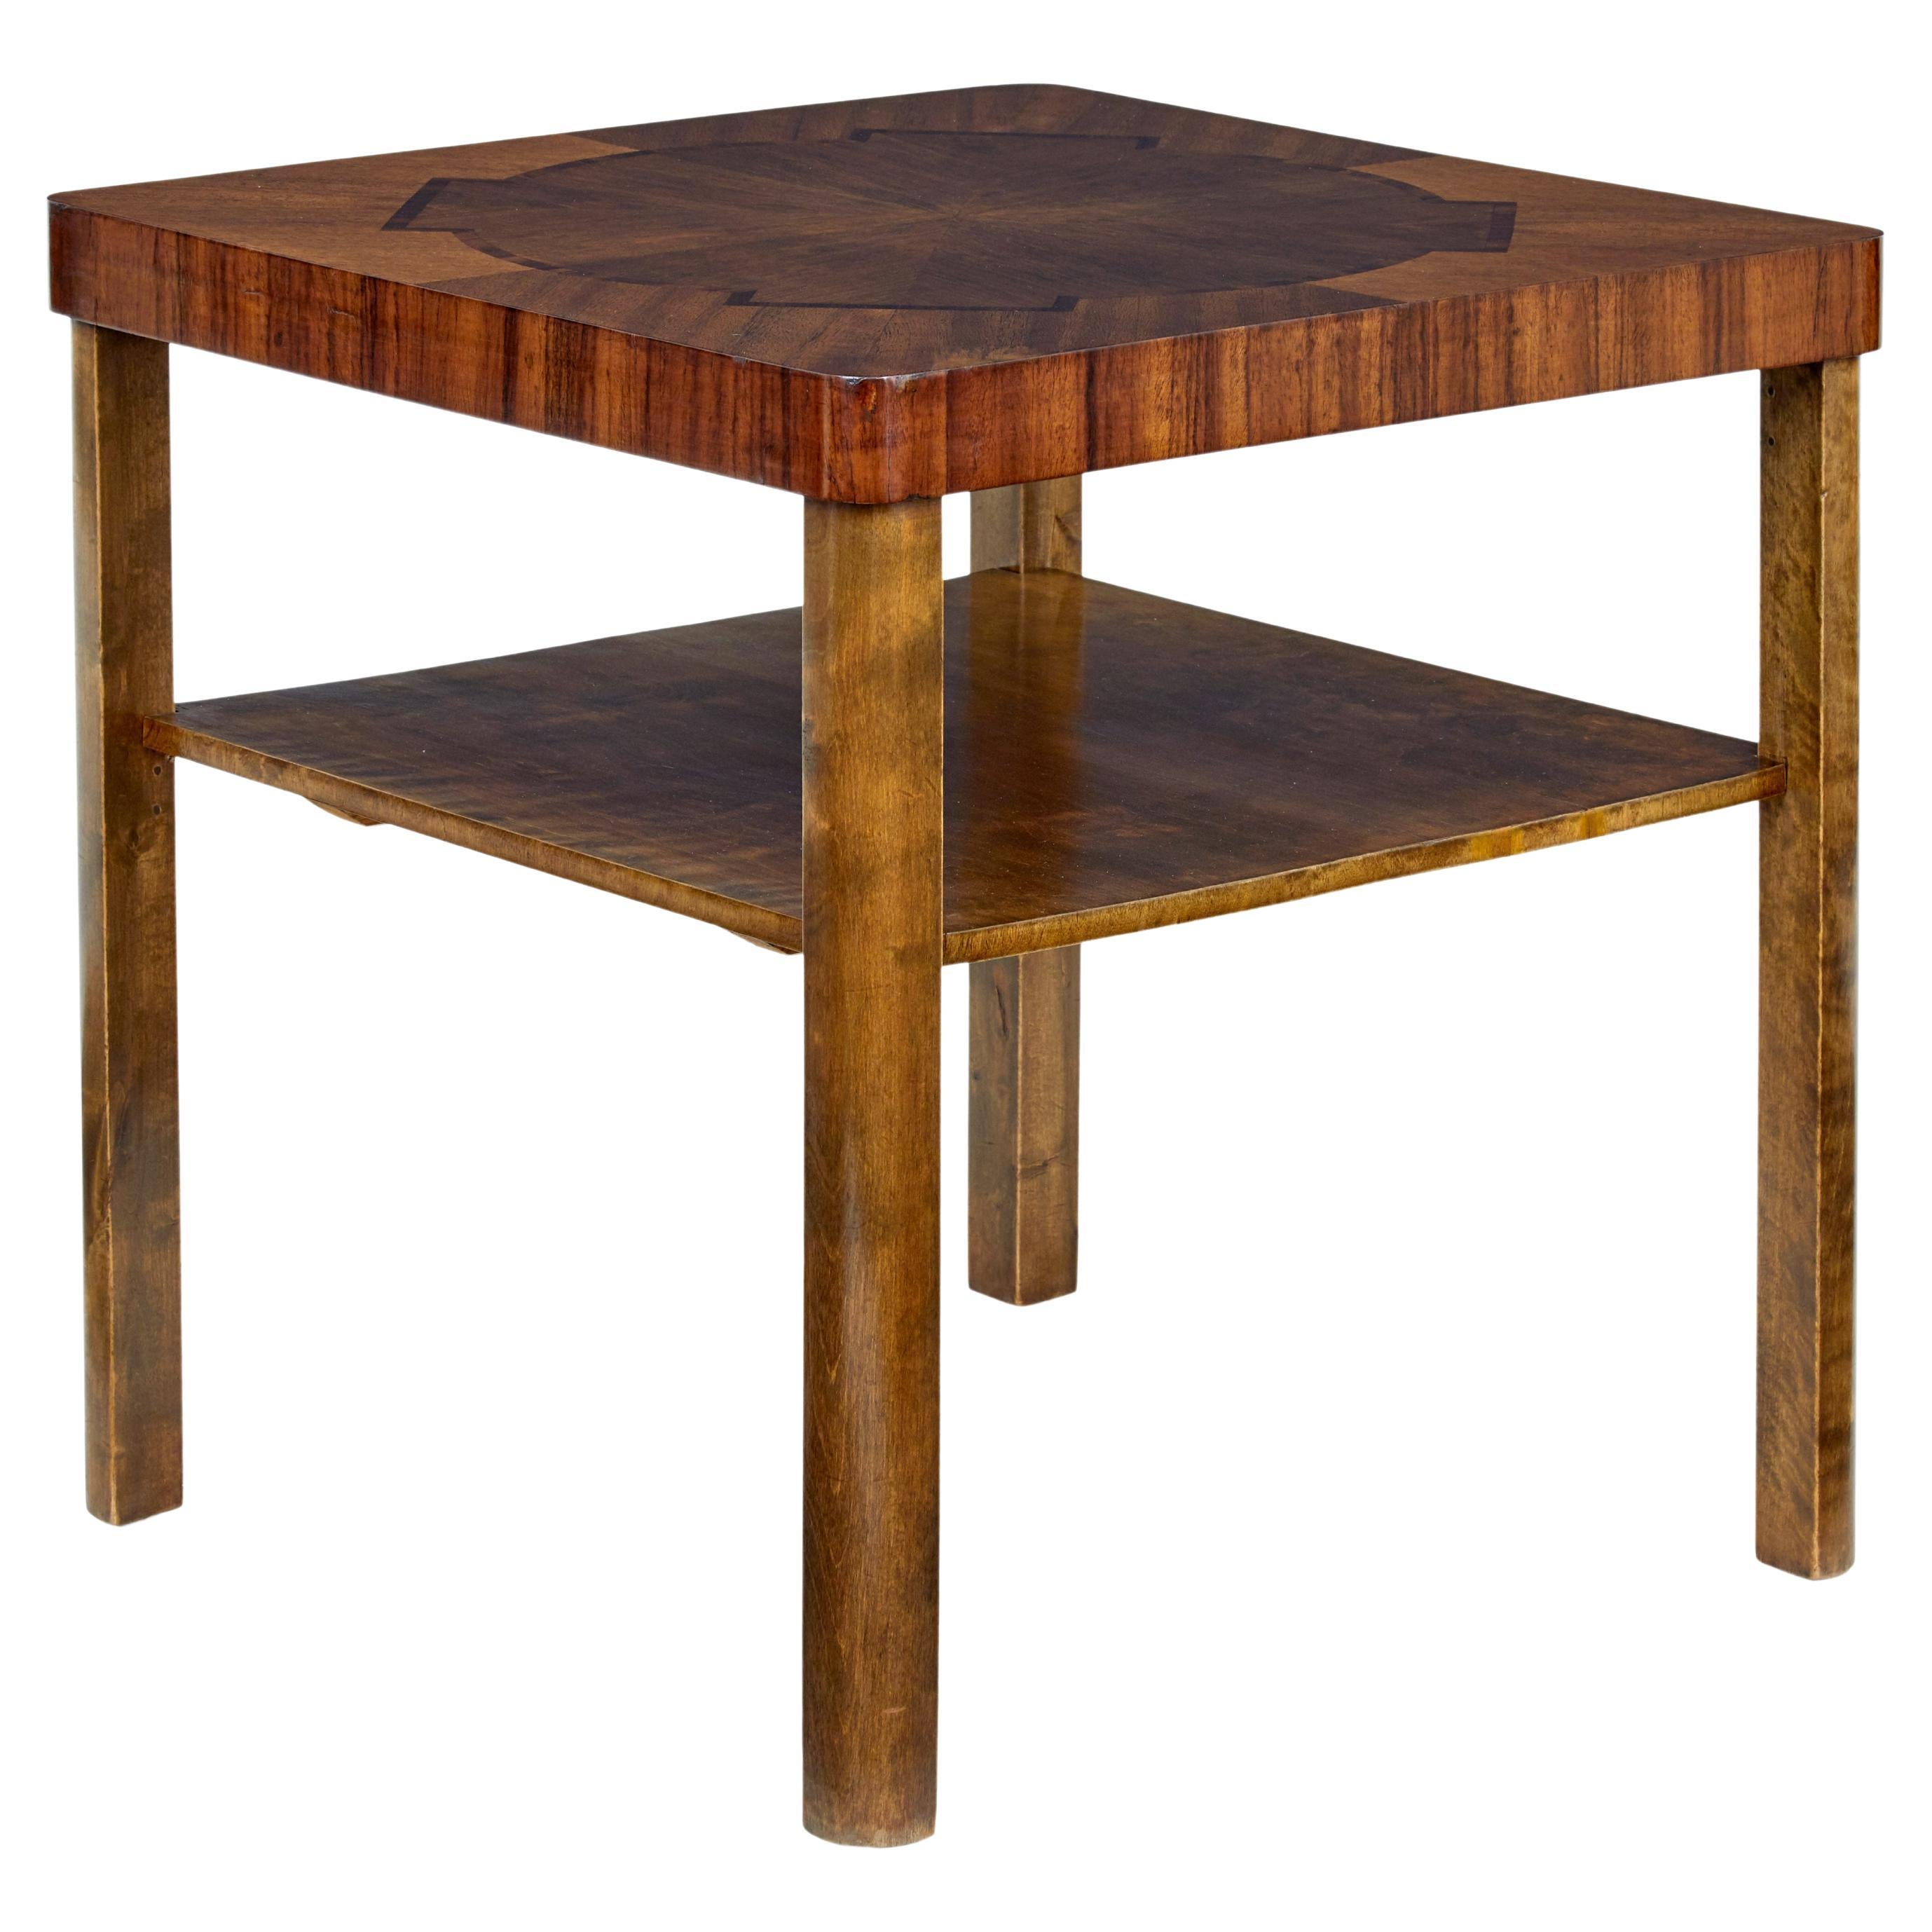 Mid 20th century walnut and birch inlaid coffee table For Sale